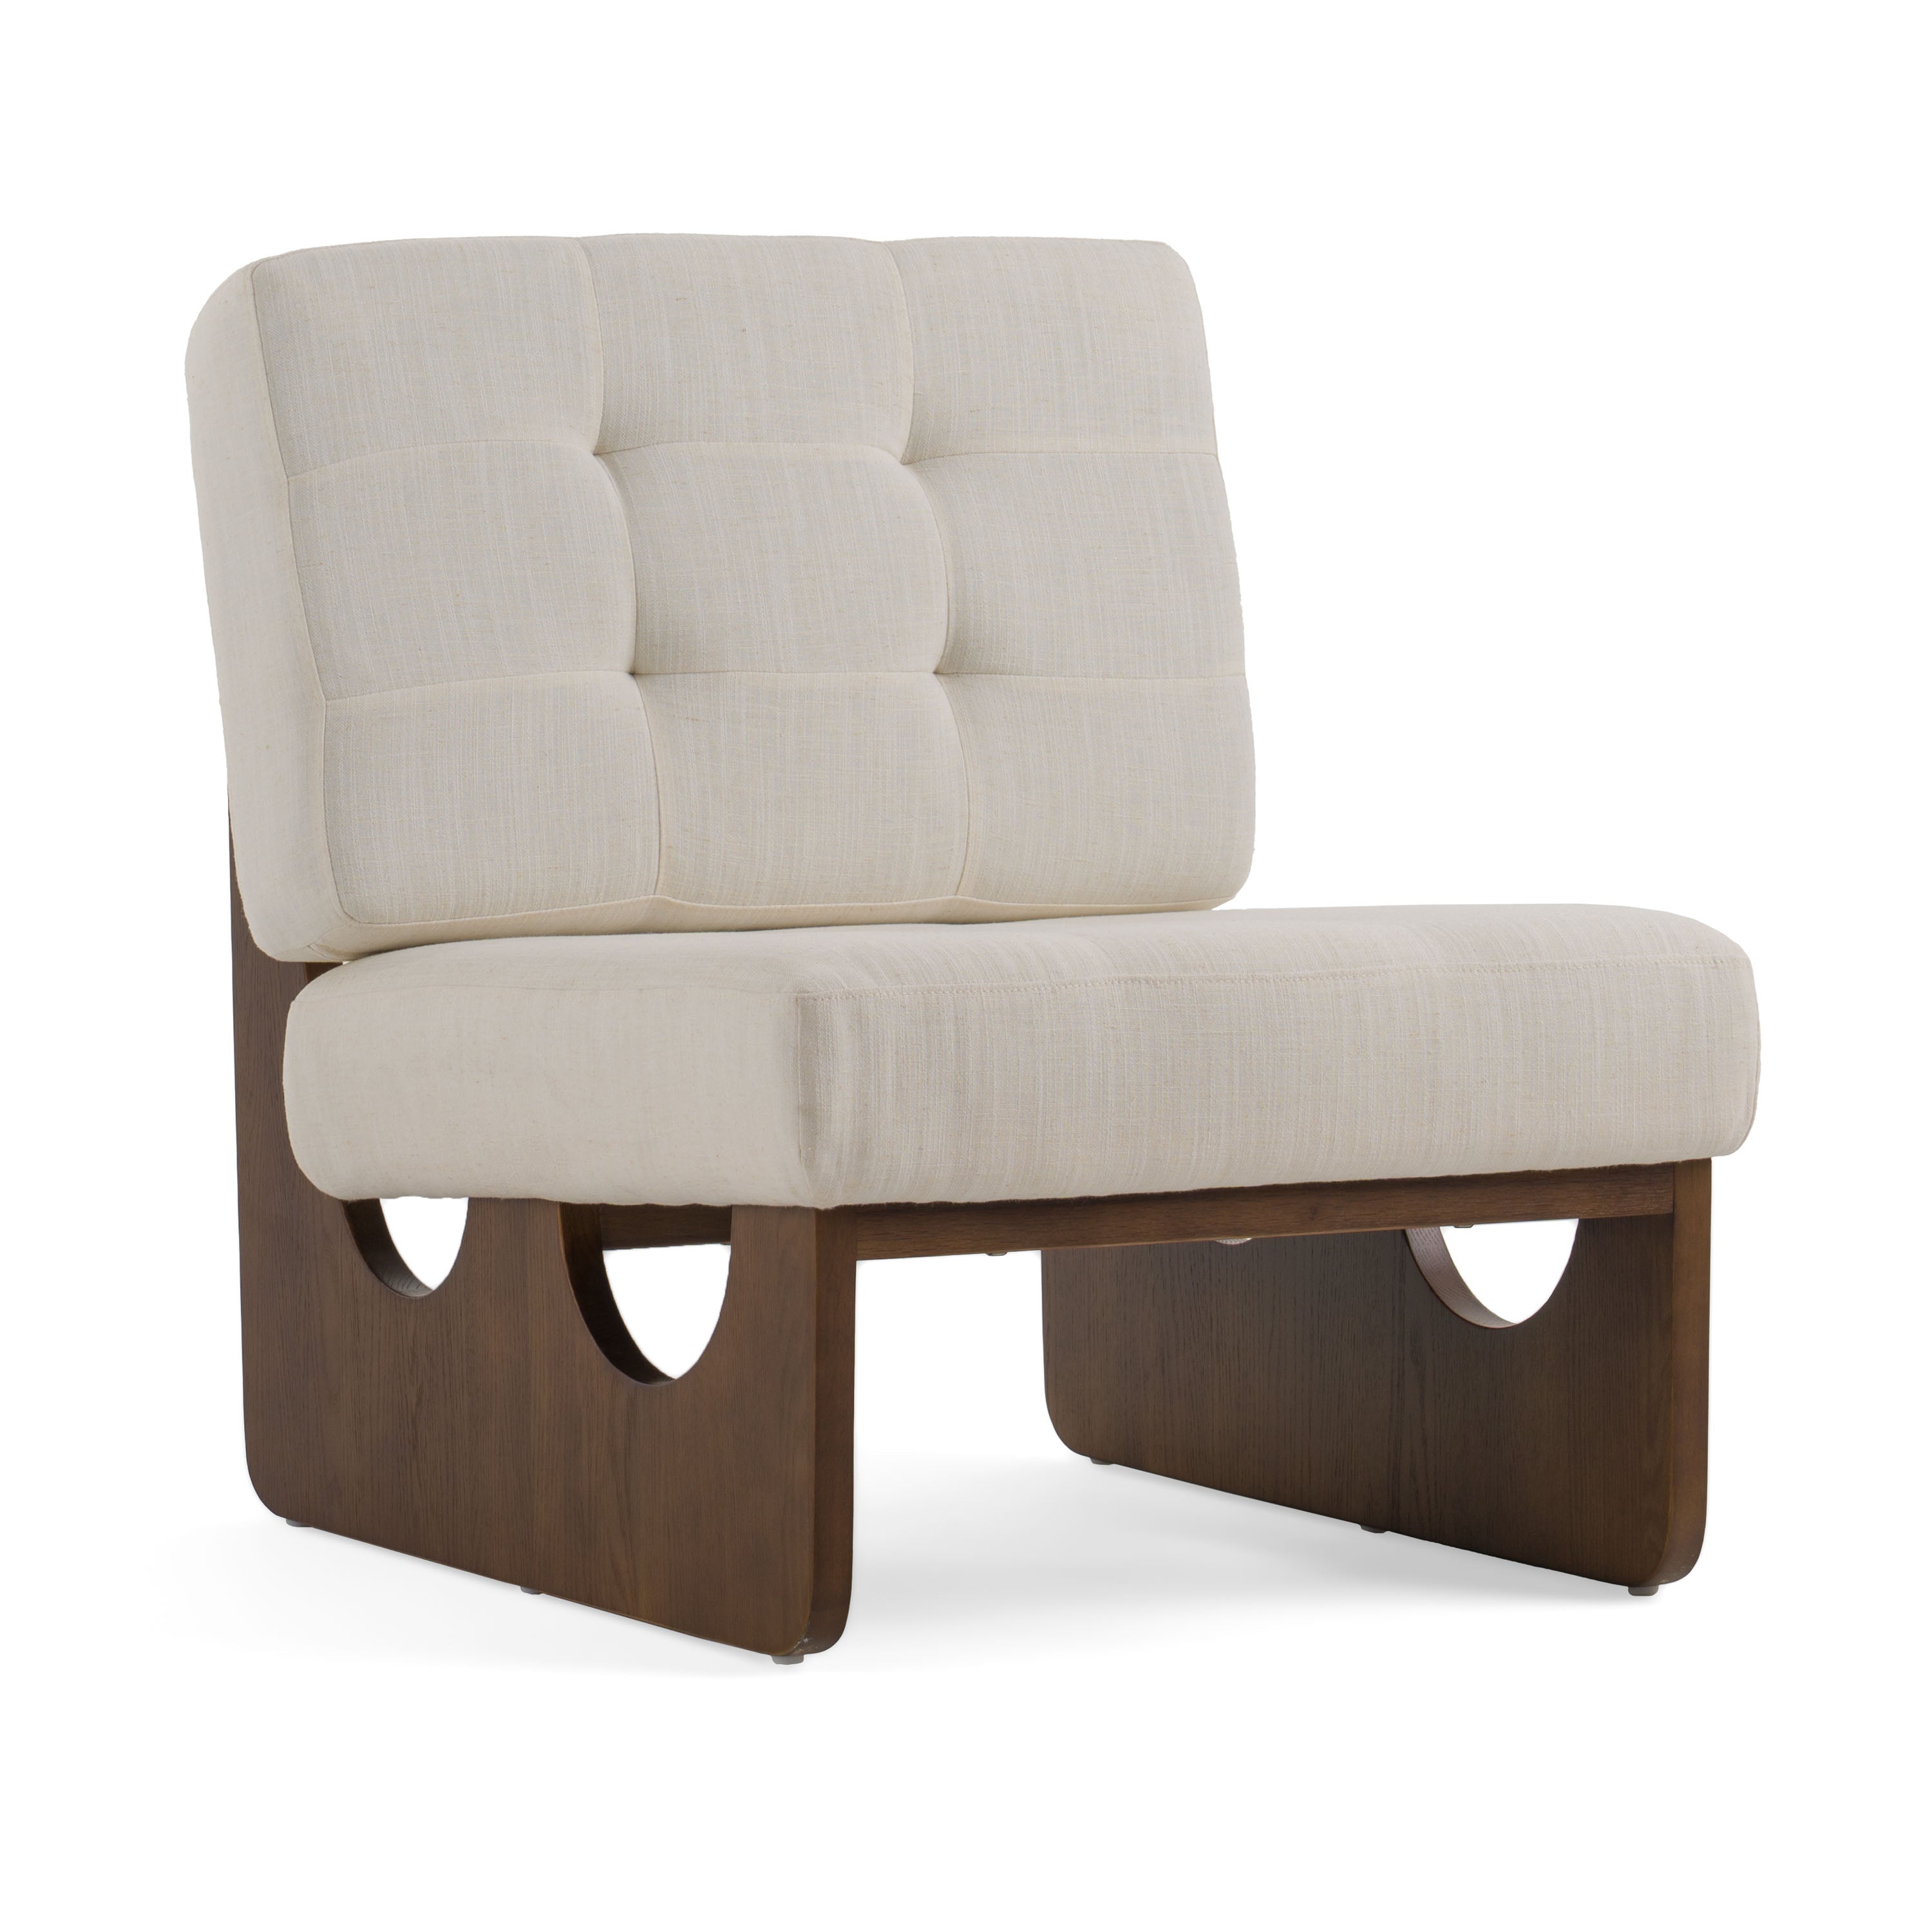 Modrest Kaylie - Contemporary Off White Accent Chair